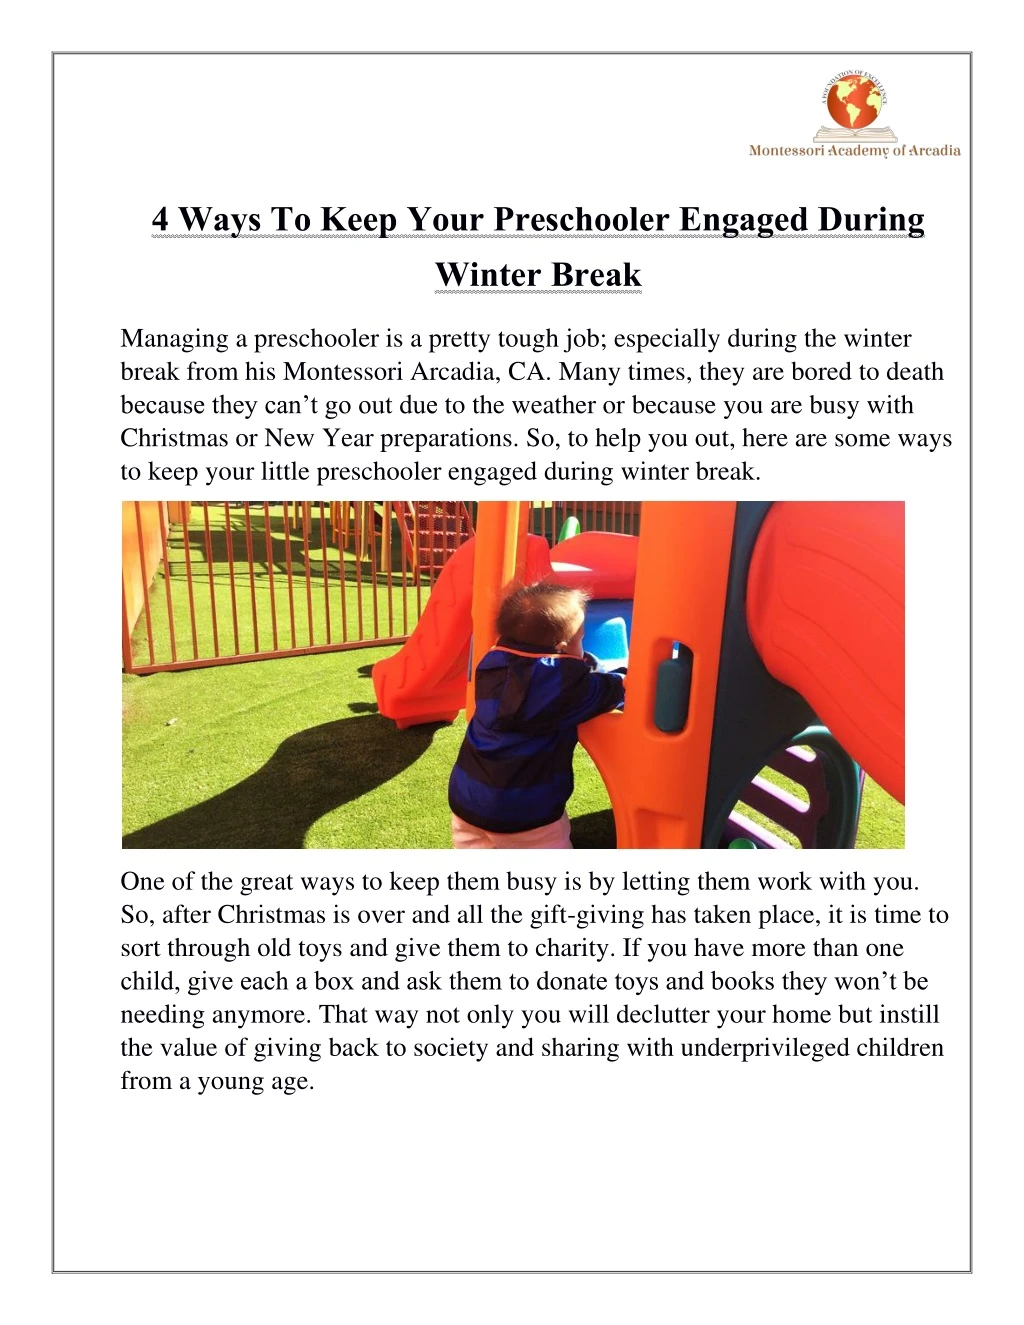 4 ways to keep your preschooler engaged during